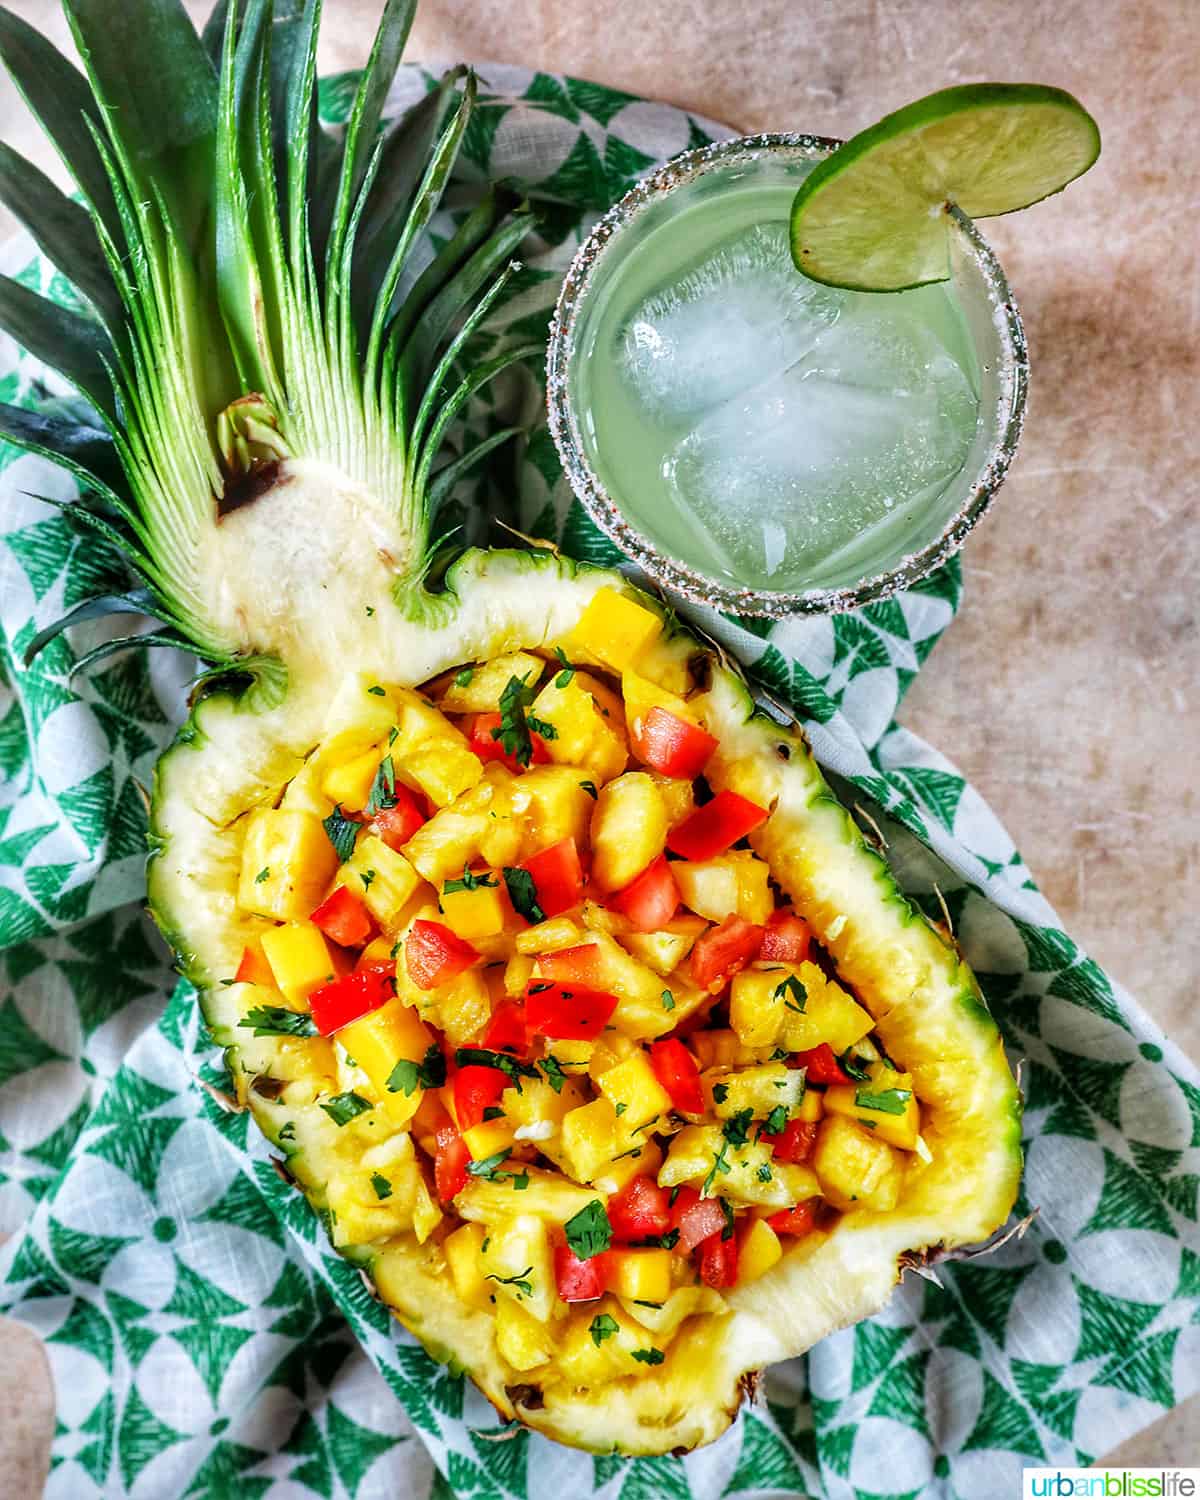 chopped pineapple, mango, tomatoes, and onions in a hollowed out pineapple with glass of margarita.